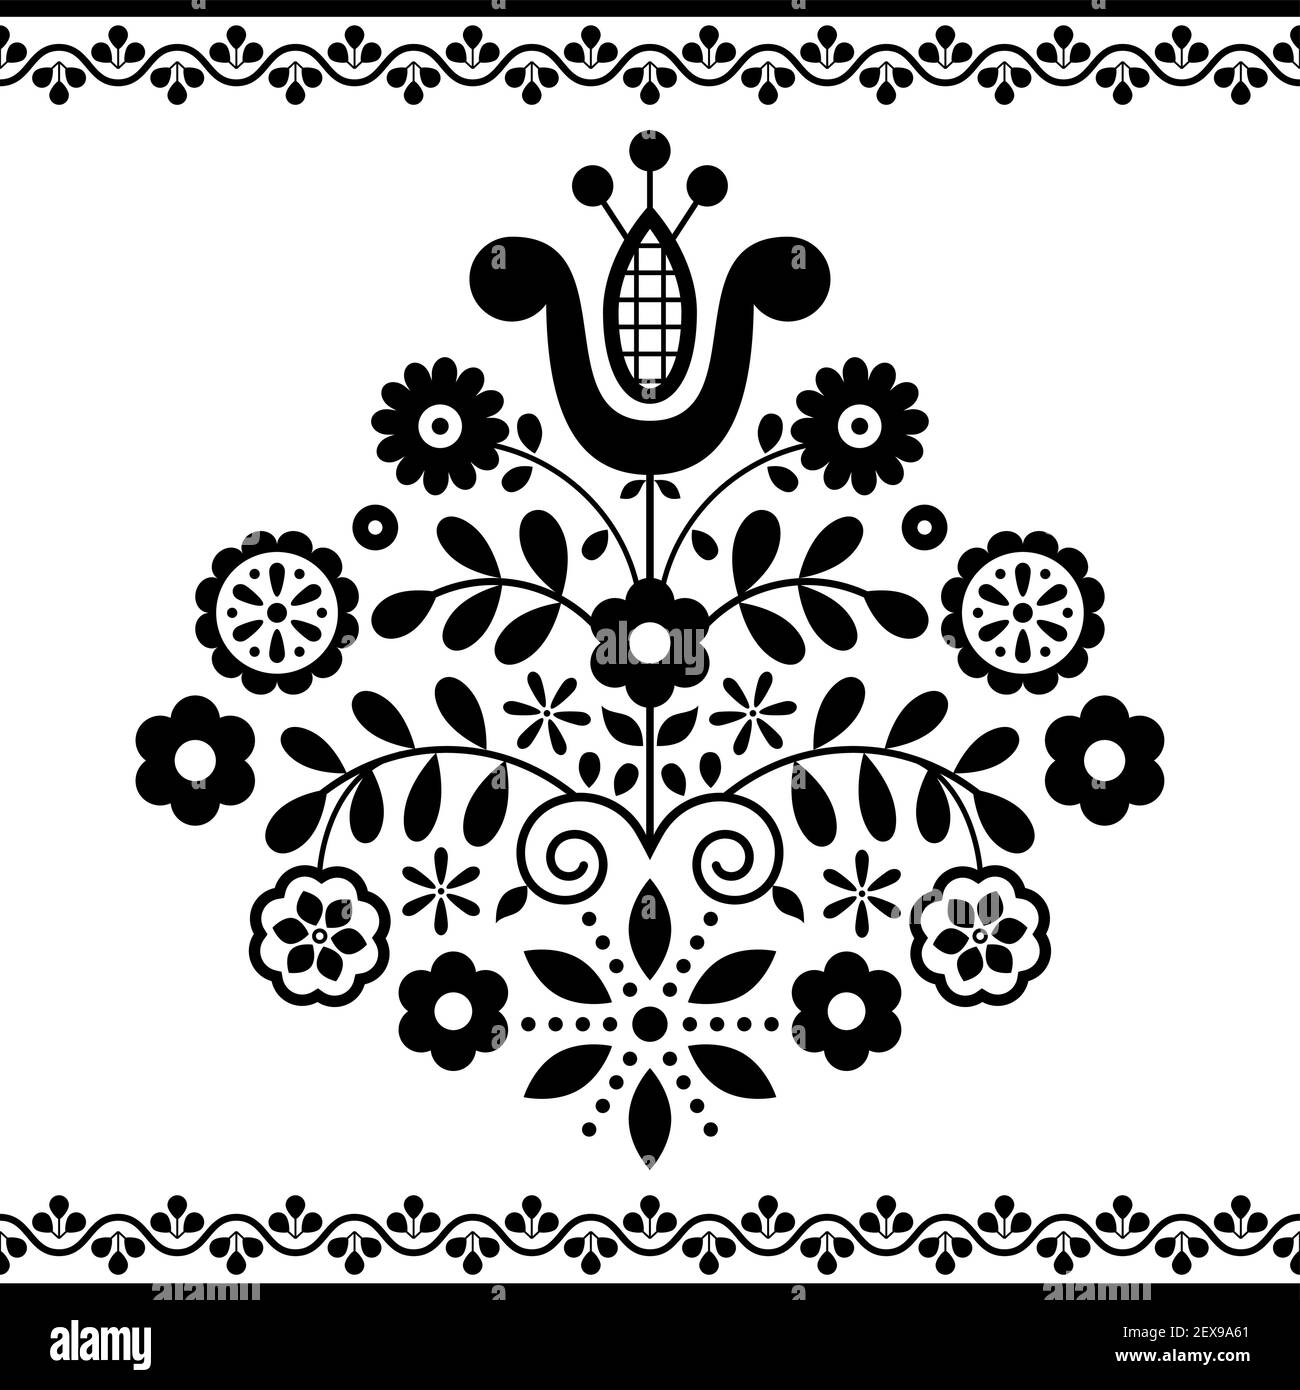 Polish  floral folk art vector pattern inspired by traditional highlanders embroidery Lachy Sadeckie - black and white greeting card design or wedding Stock Vector